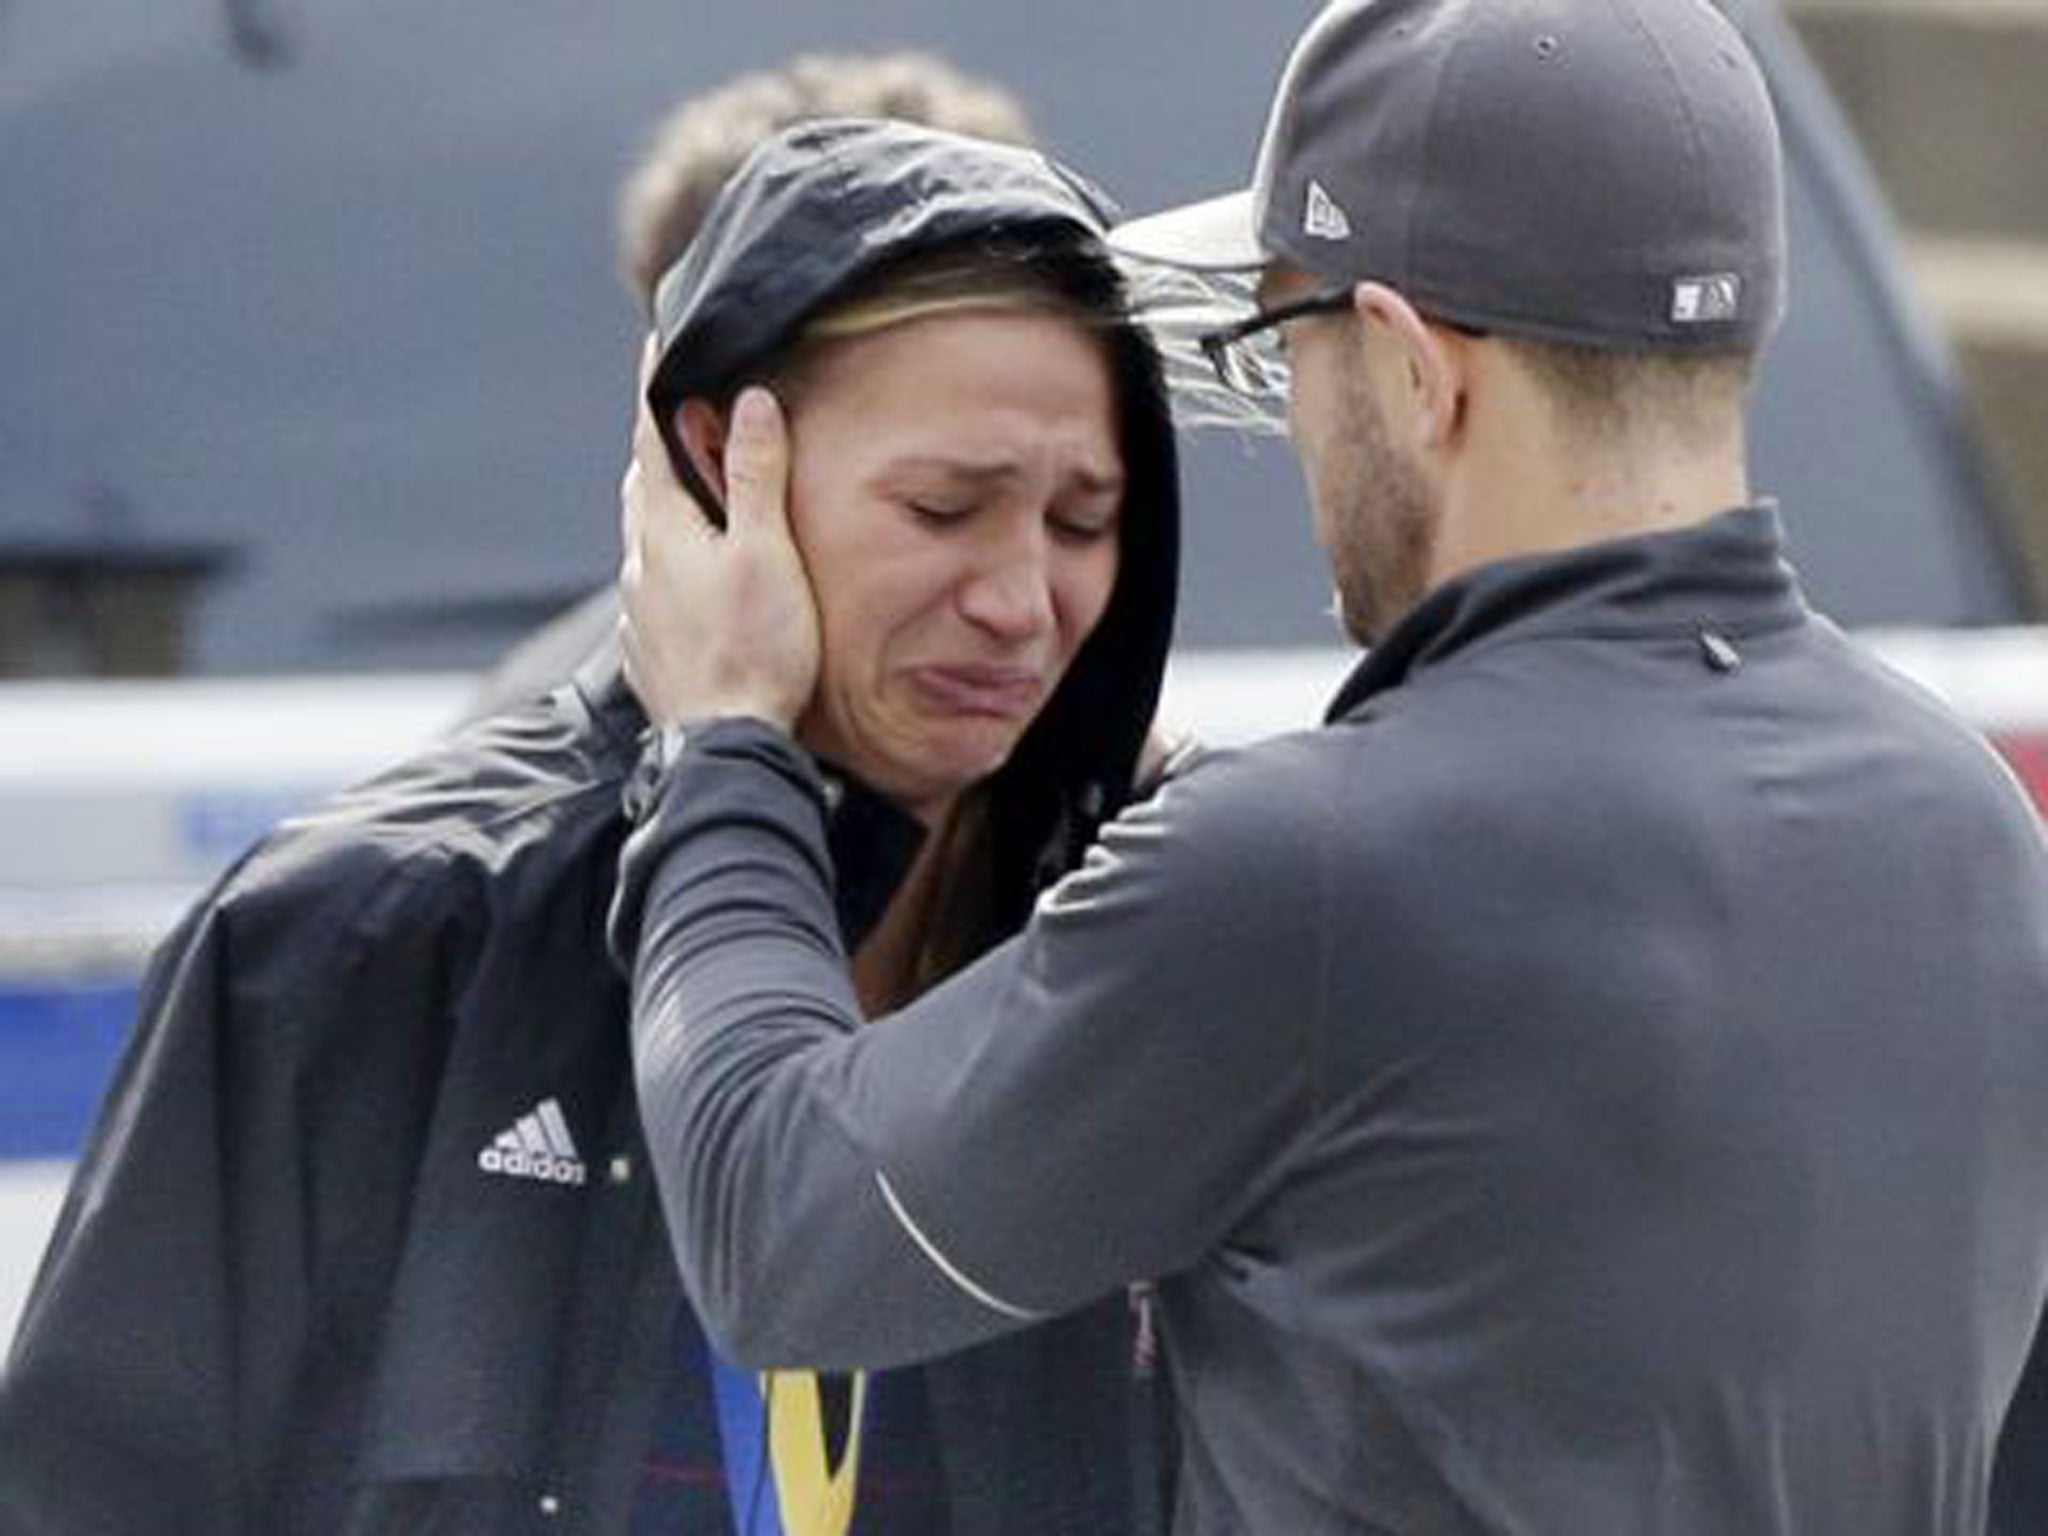 An unidentified Boston Marathon runner is comforted as she cries in the aftermath of two blasts which exploded near the finish line of the Boston Marathon